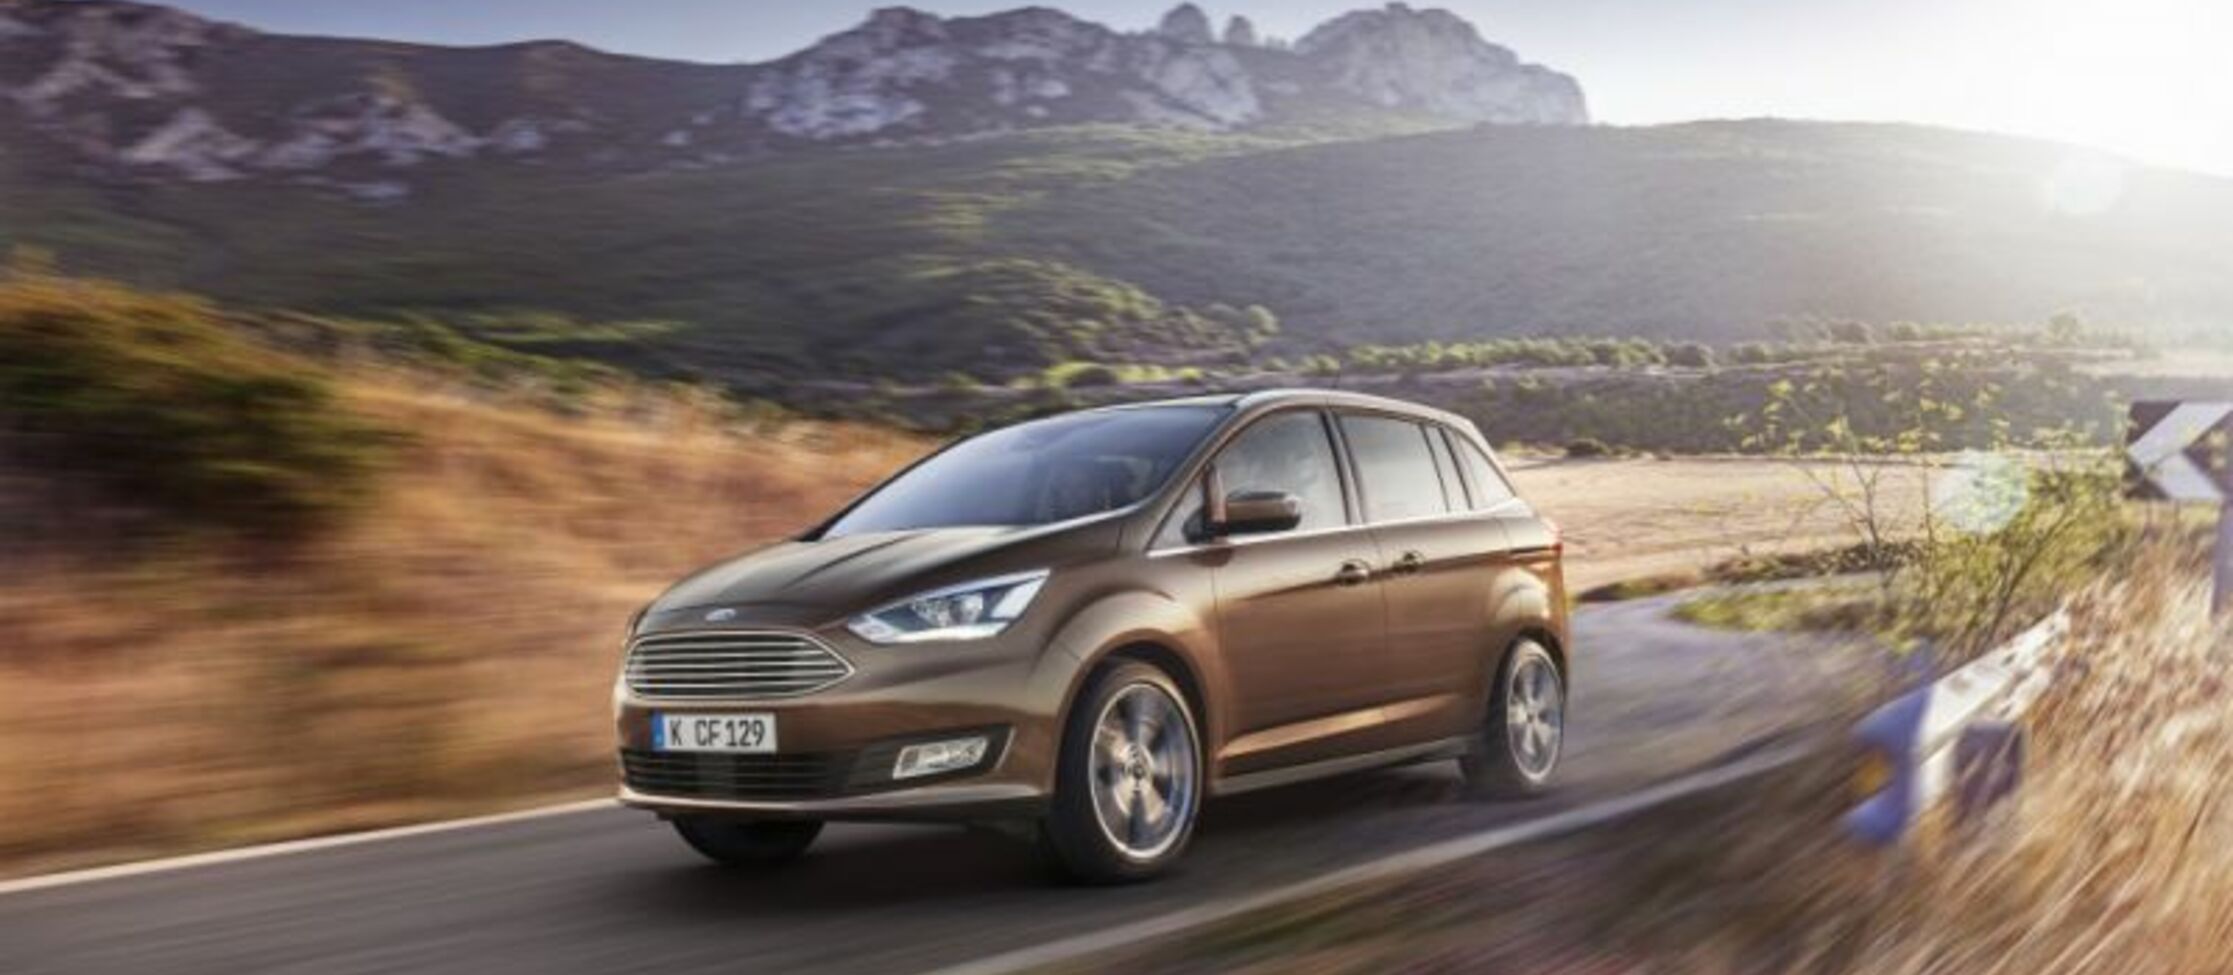 Ford Grand C-MAX (facelift 2015) 1.5 EcoBoost (150 Hp) S&S 7 Seat 2015, 2016, 2017, 2018, 2019, 2020, 2021